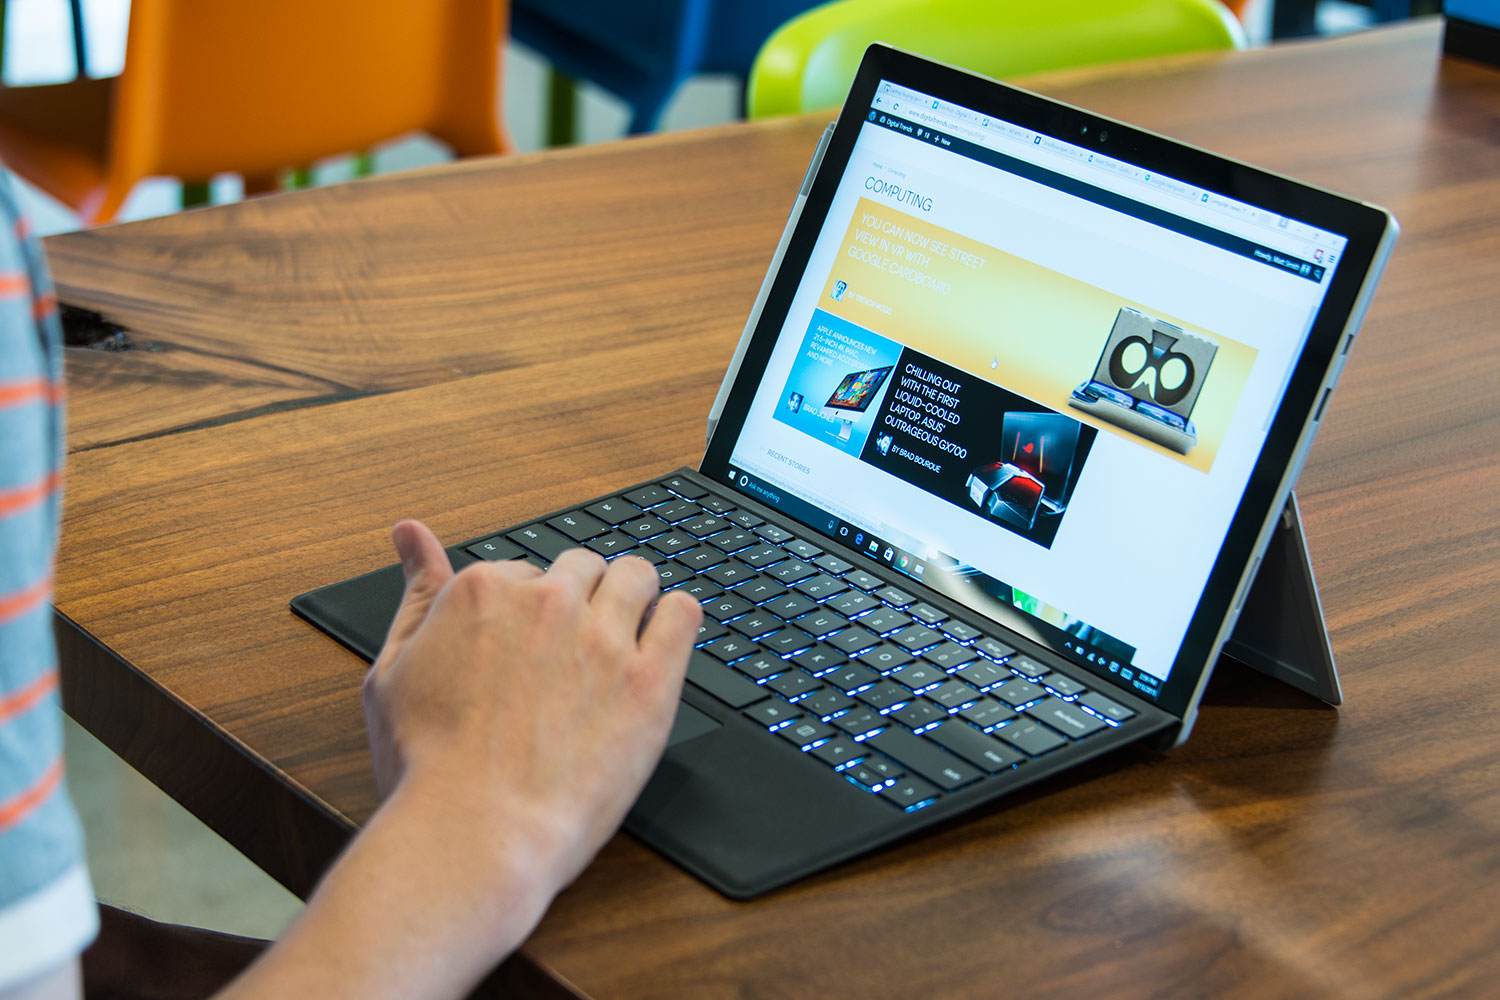 Microsoft Surface Pro 4 Review: Redefining the Laptop | Digital Trends